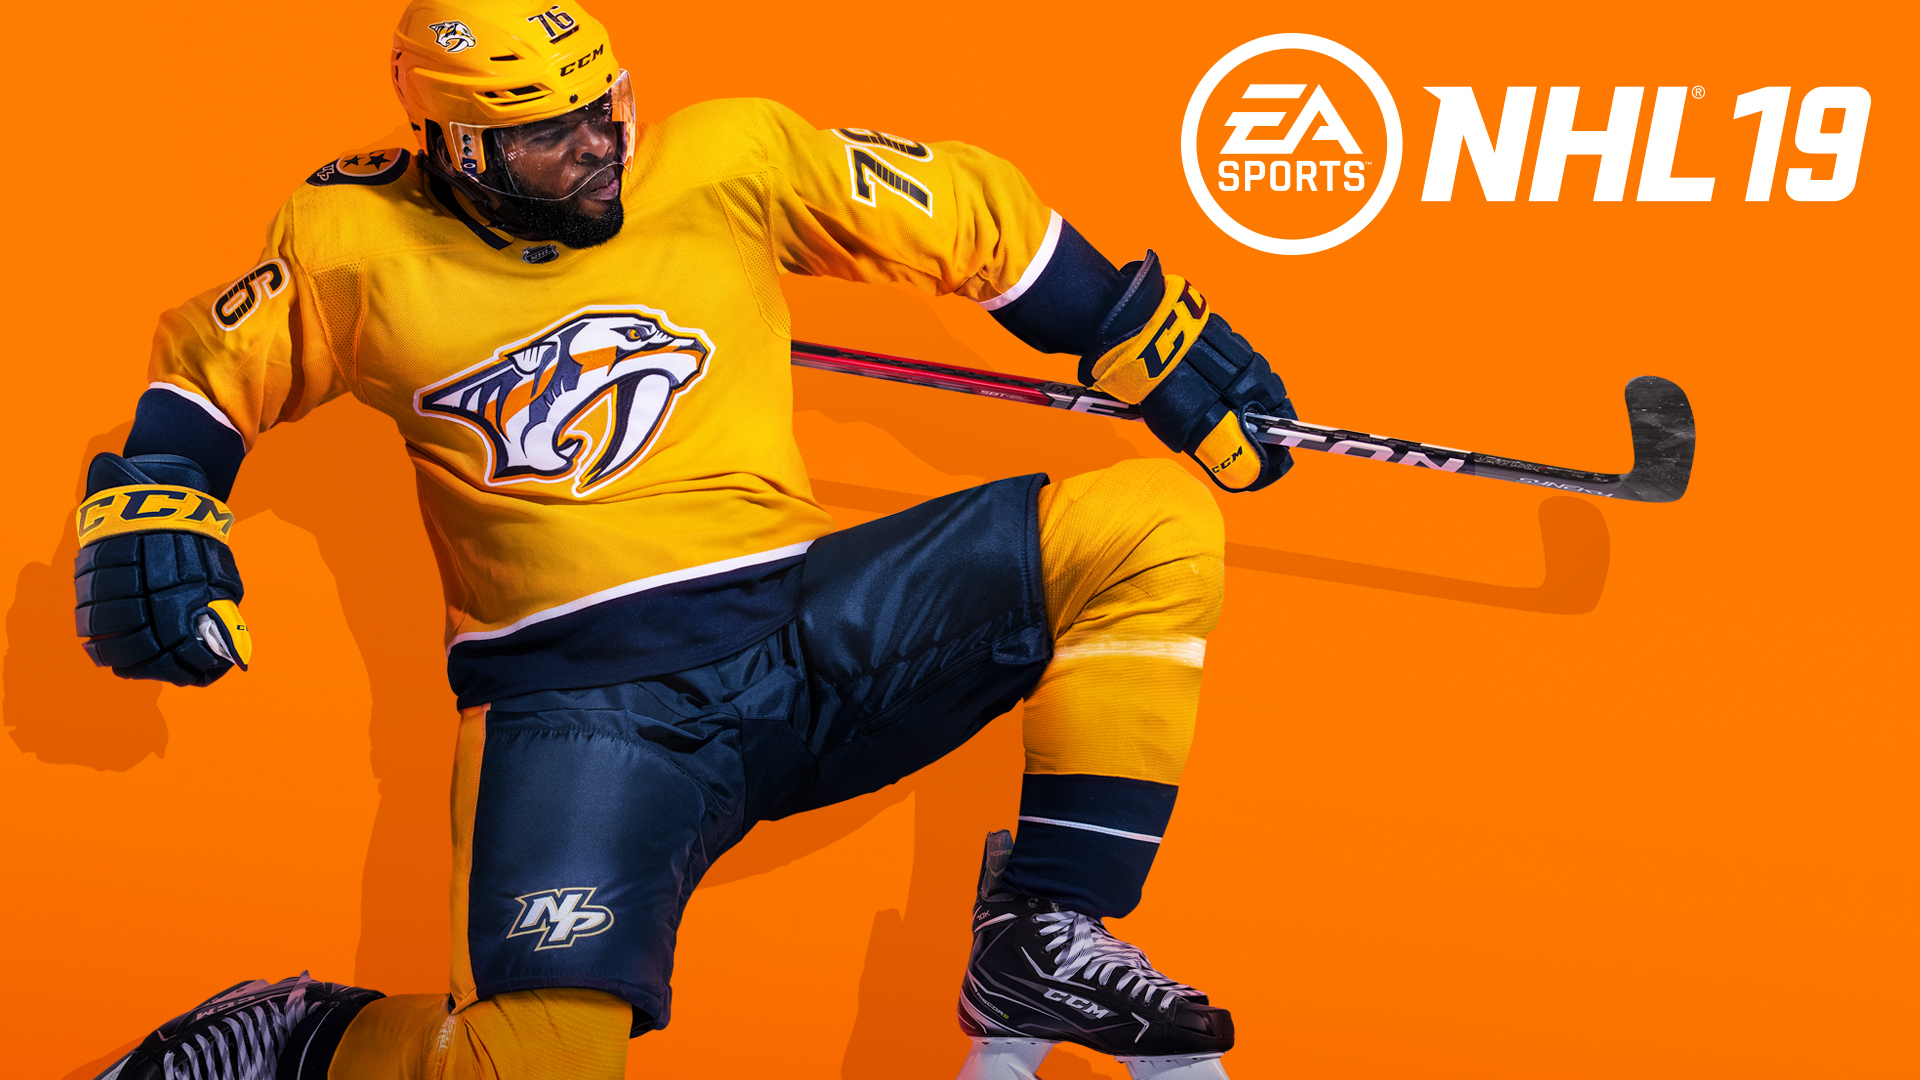 Nhl 19 Swedish Cover Athlete - Pk Subban Nhl Cover , HD Wallpaper & Backgrounds